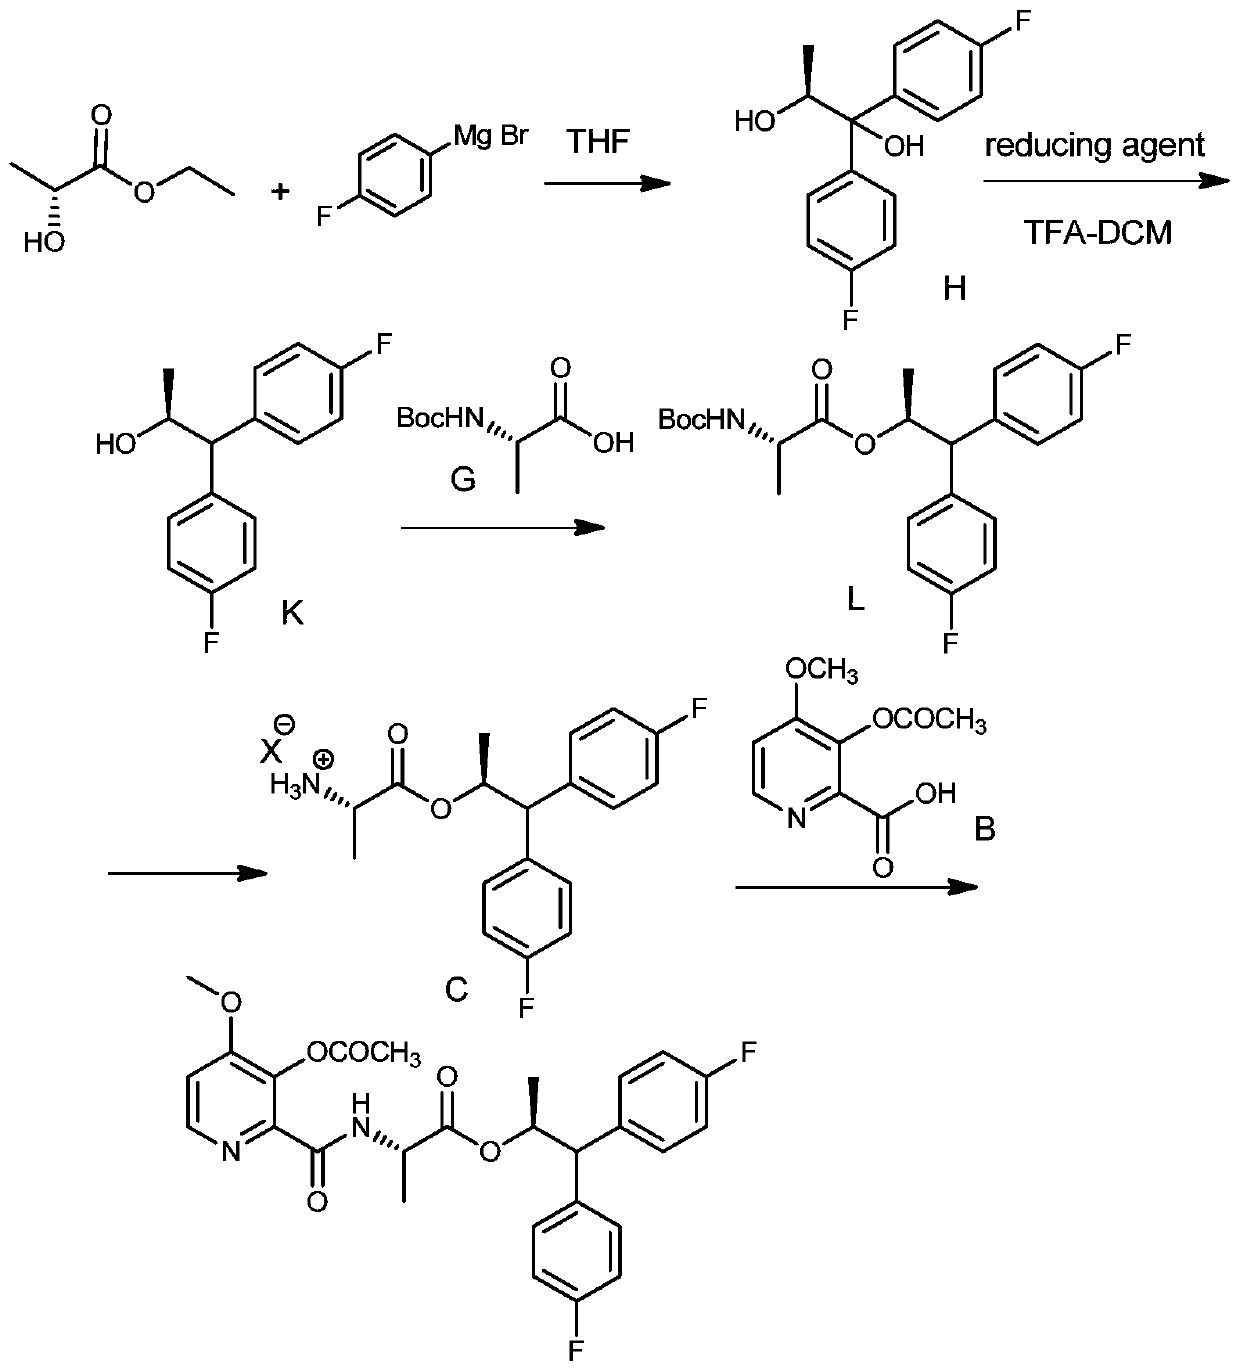 Application of ketoreductase in preparation of (S)-1,1-bis(4-fluorophenyl)-2-propanol, and preparation method of (S)-1,1-bis(4-fluorophenyl)-2-propanol